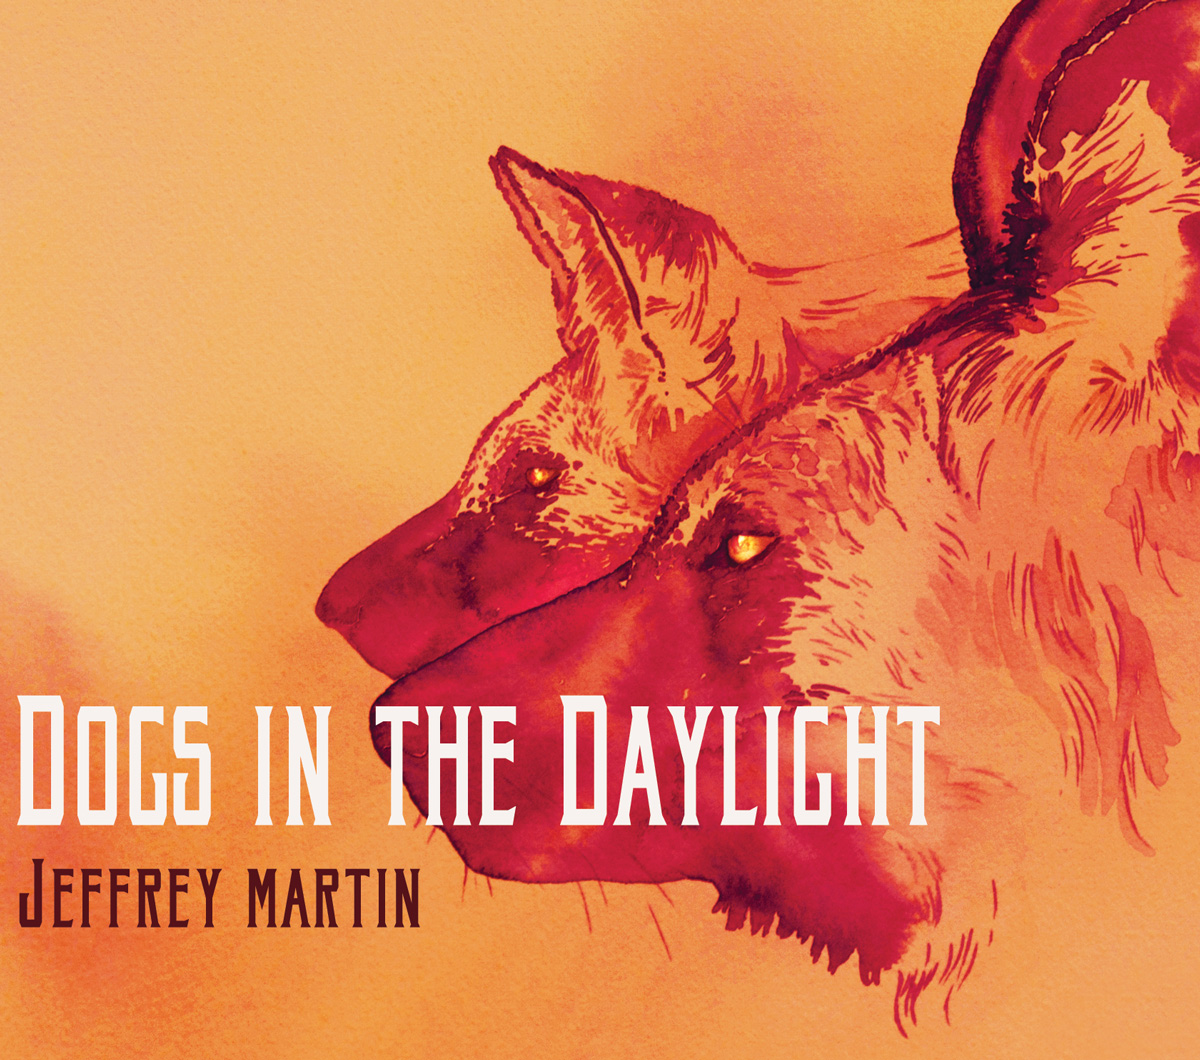 Jeffrey Martin's Dogs in the Daylight available August 19